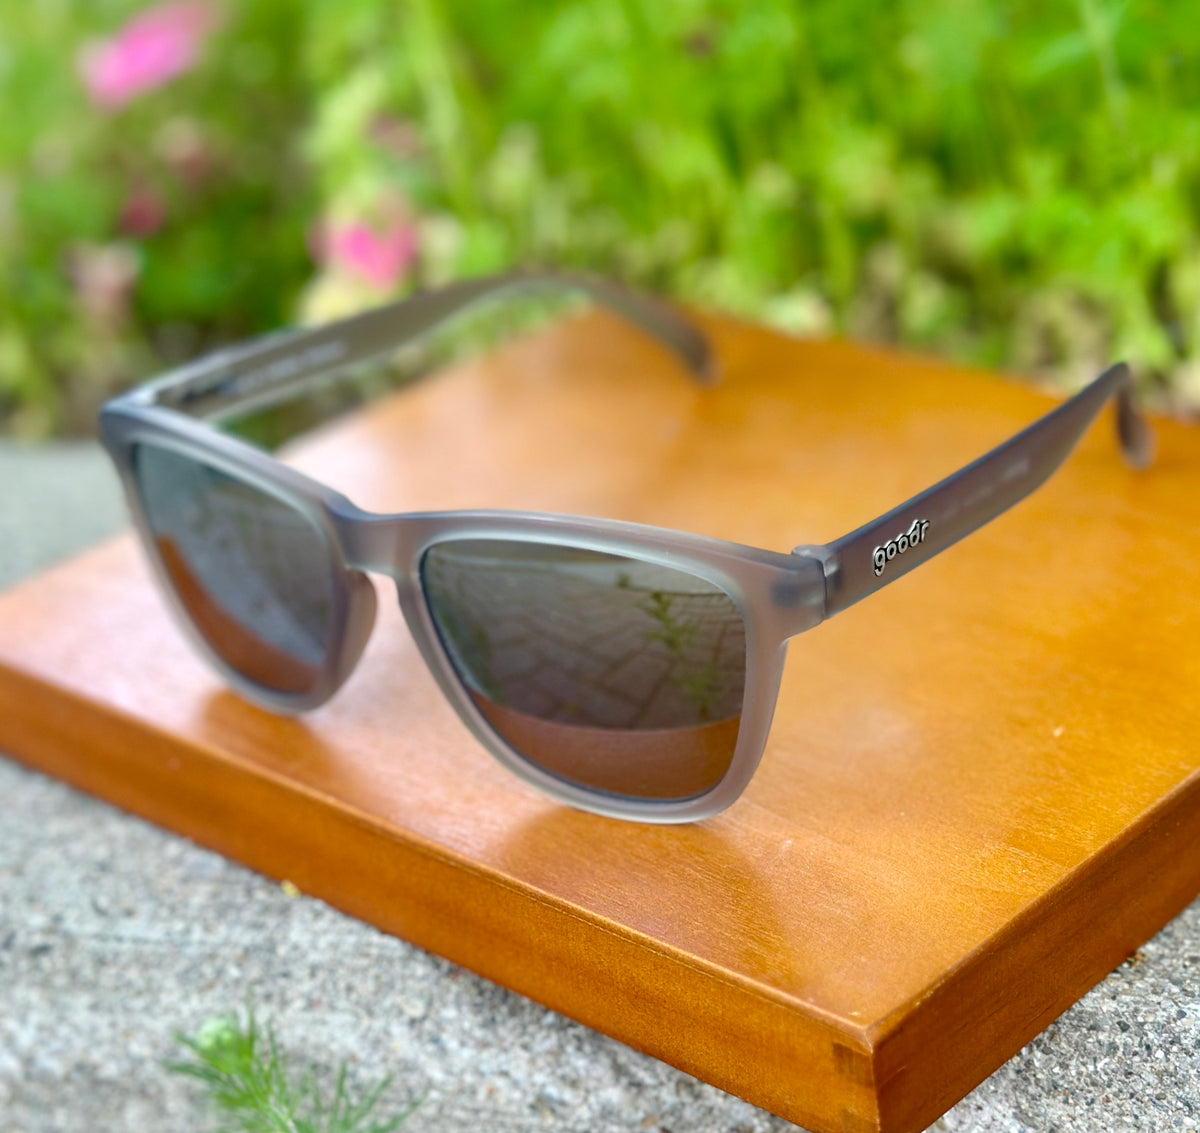 Goodr Sunglasses - The OGs: Going to ValhallaWitness